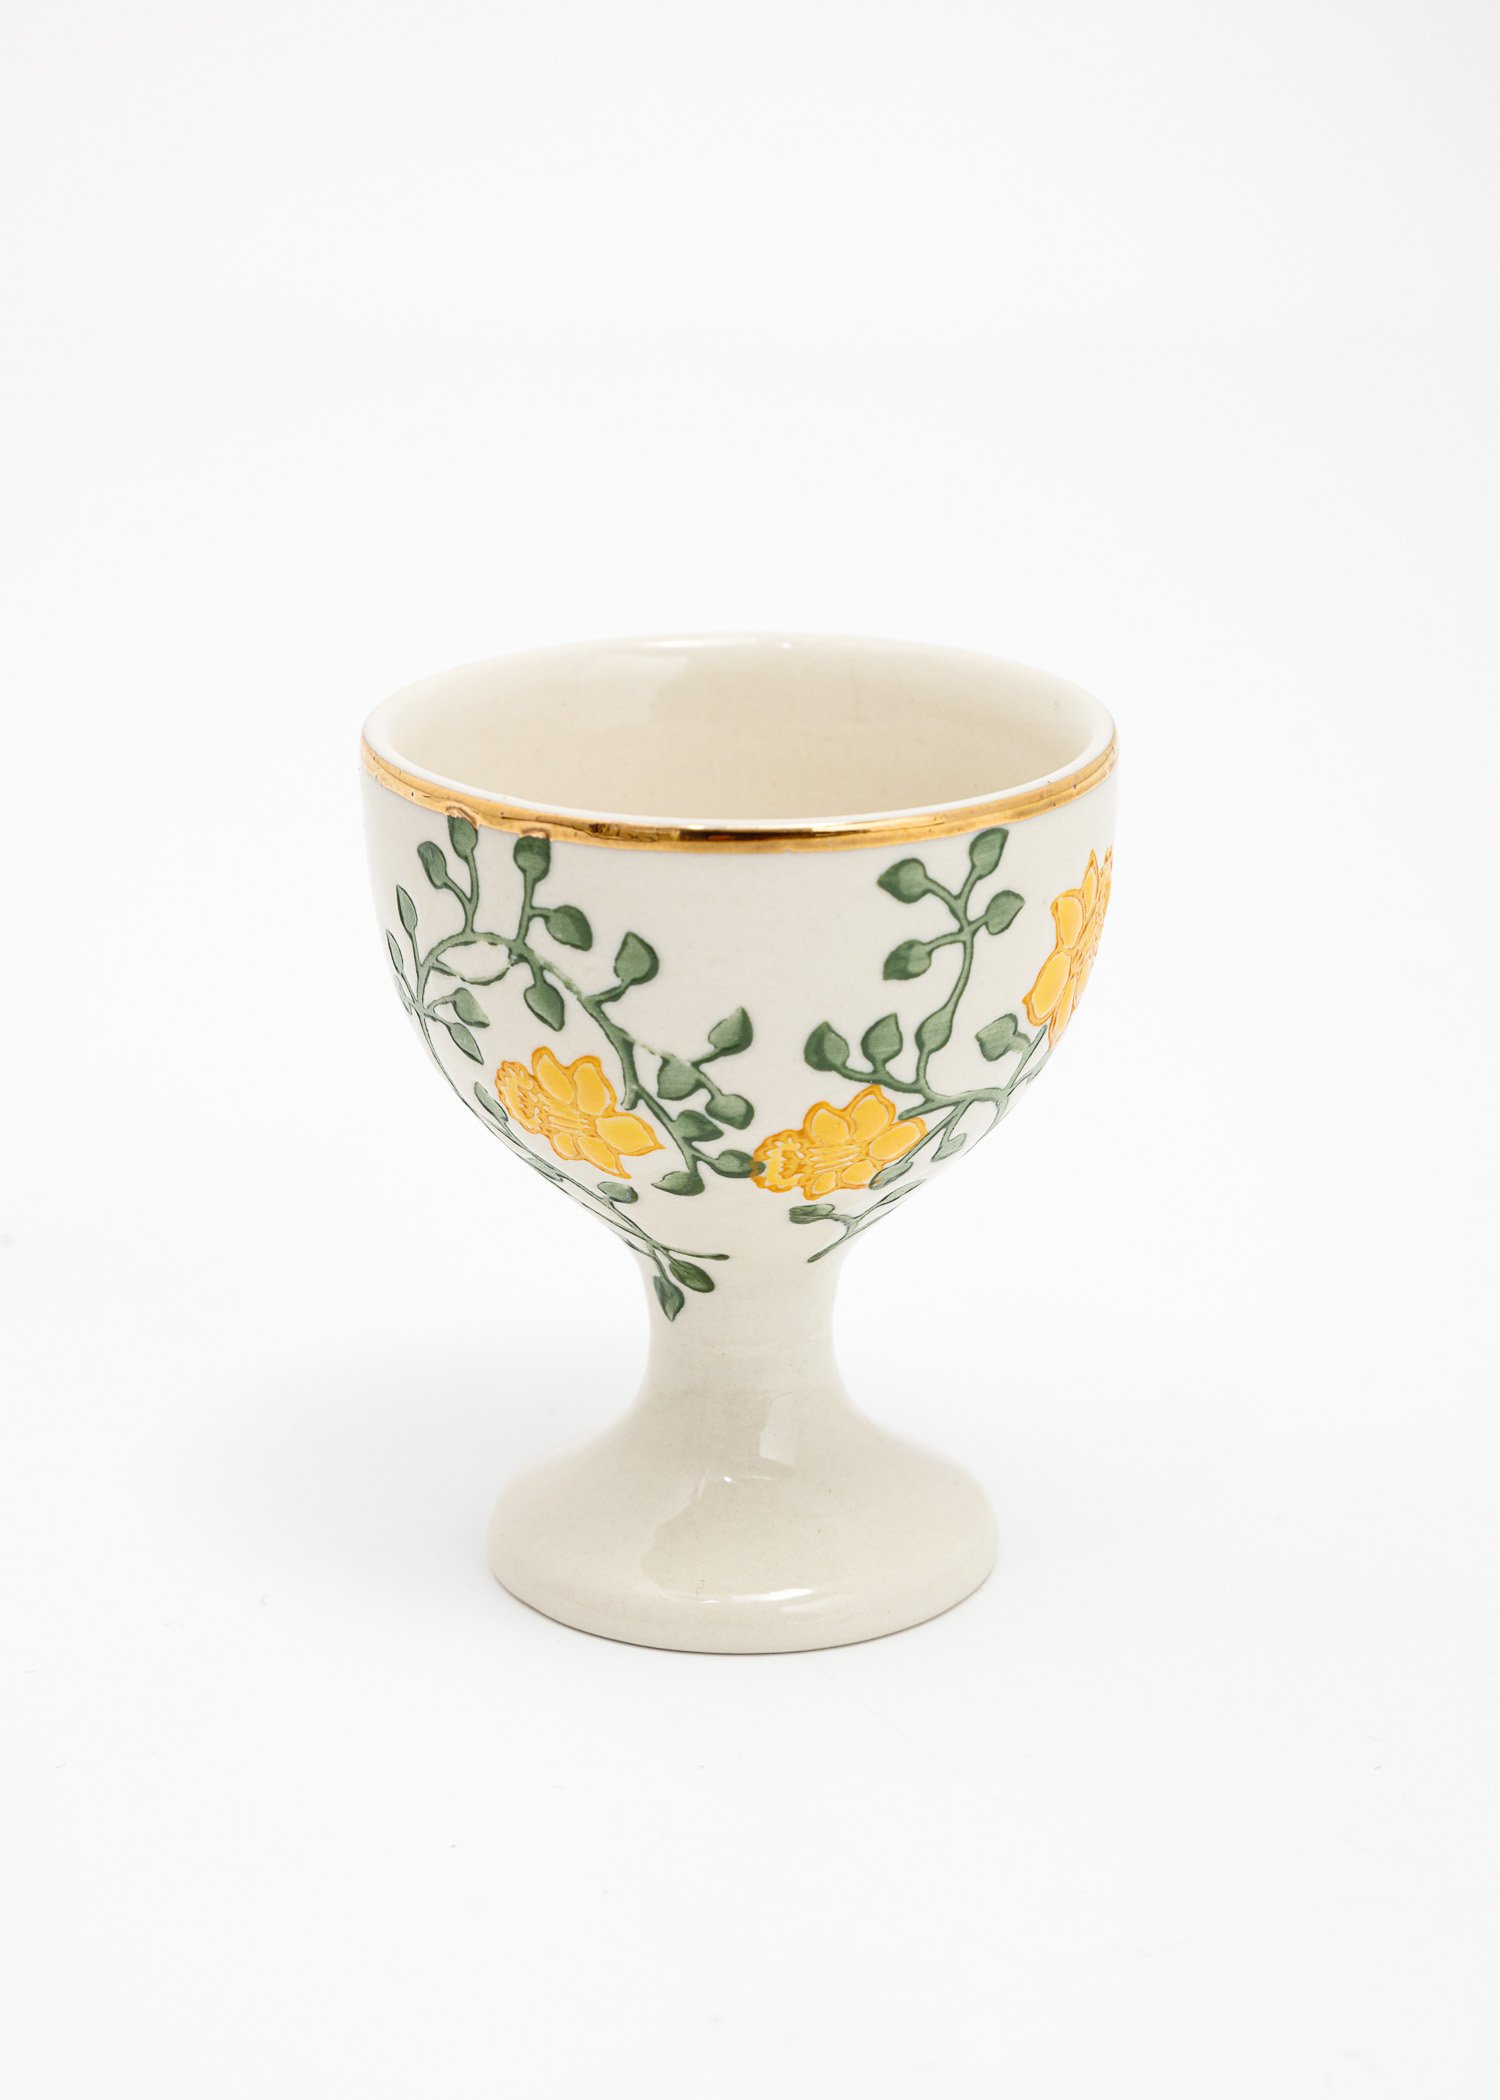 Hand painted egg cup